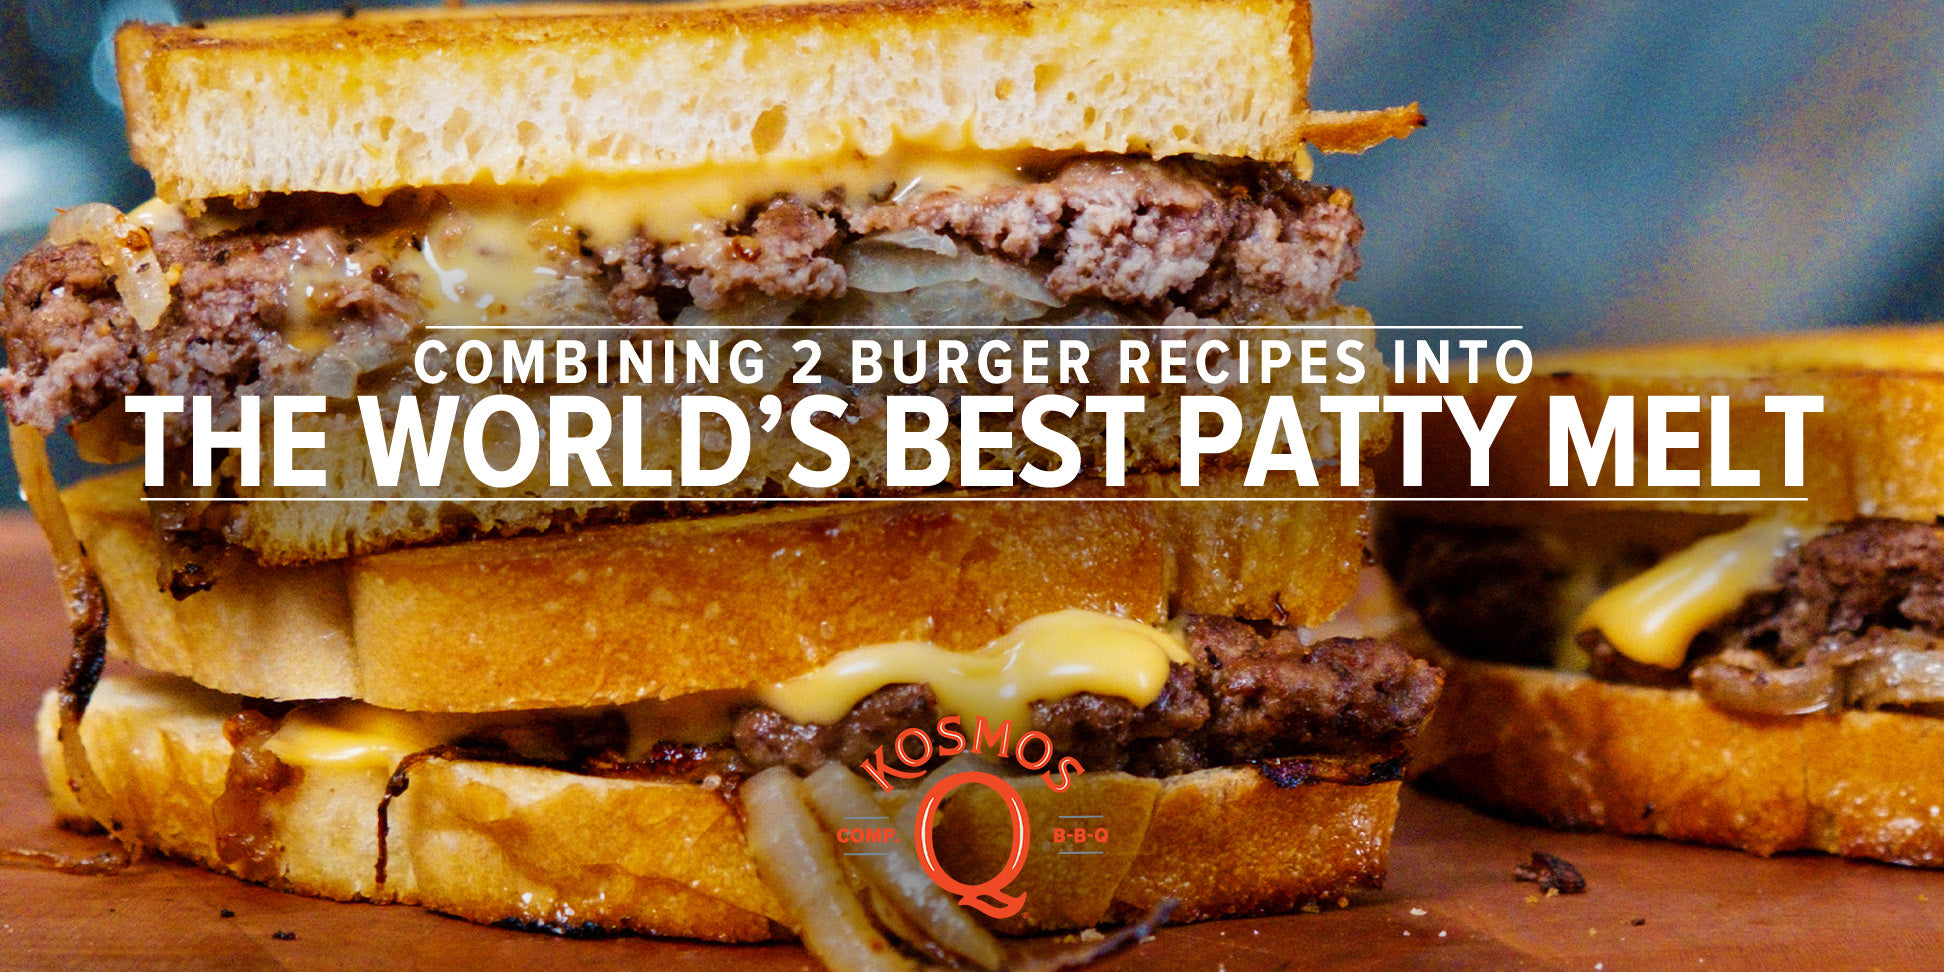 Combining 2 Burgers To Make the World's Best PATTY MELT!